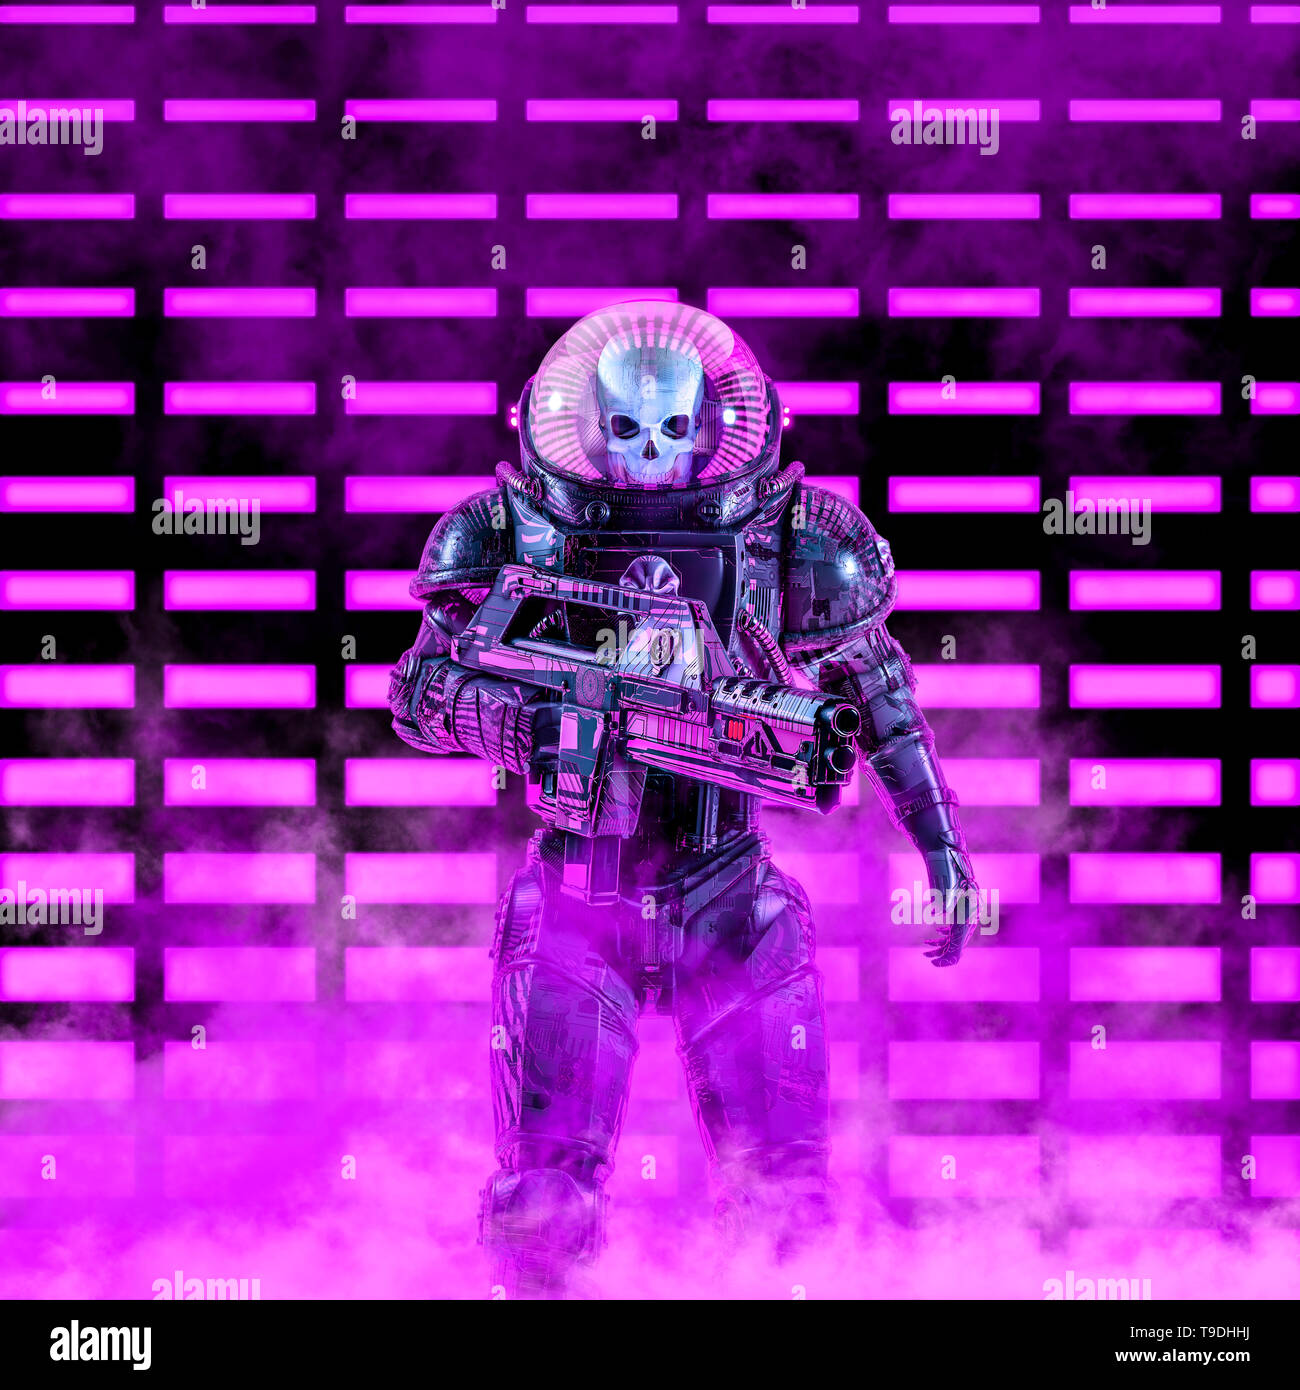 The neon dark trooper / 3D illustration of science fiction scene with evil skull faced astronaut space soldier holding laser rifle with neon lights Stock Photo